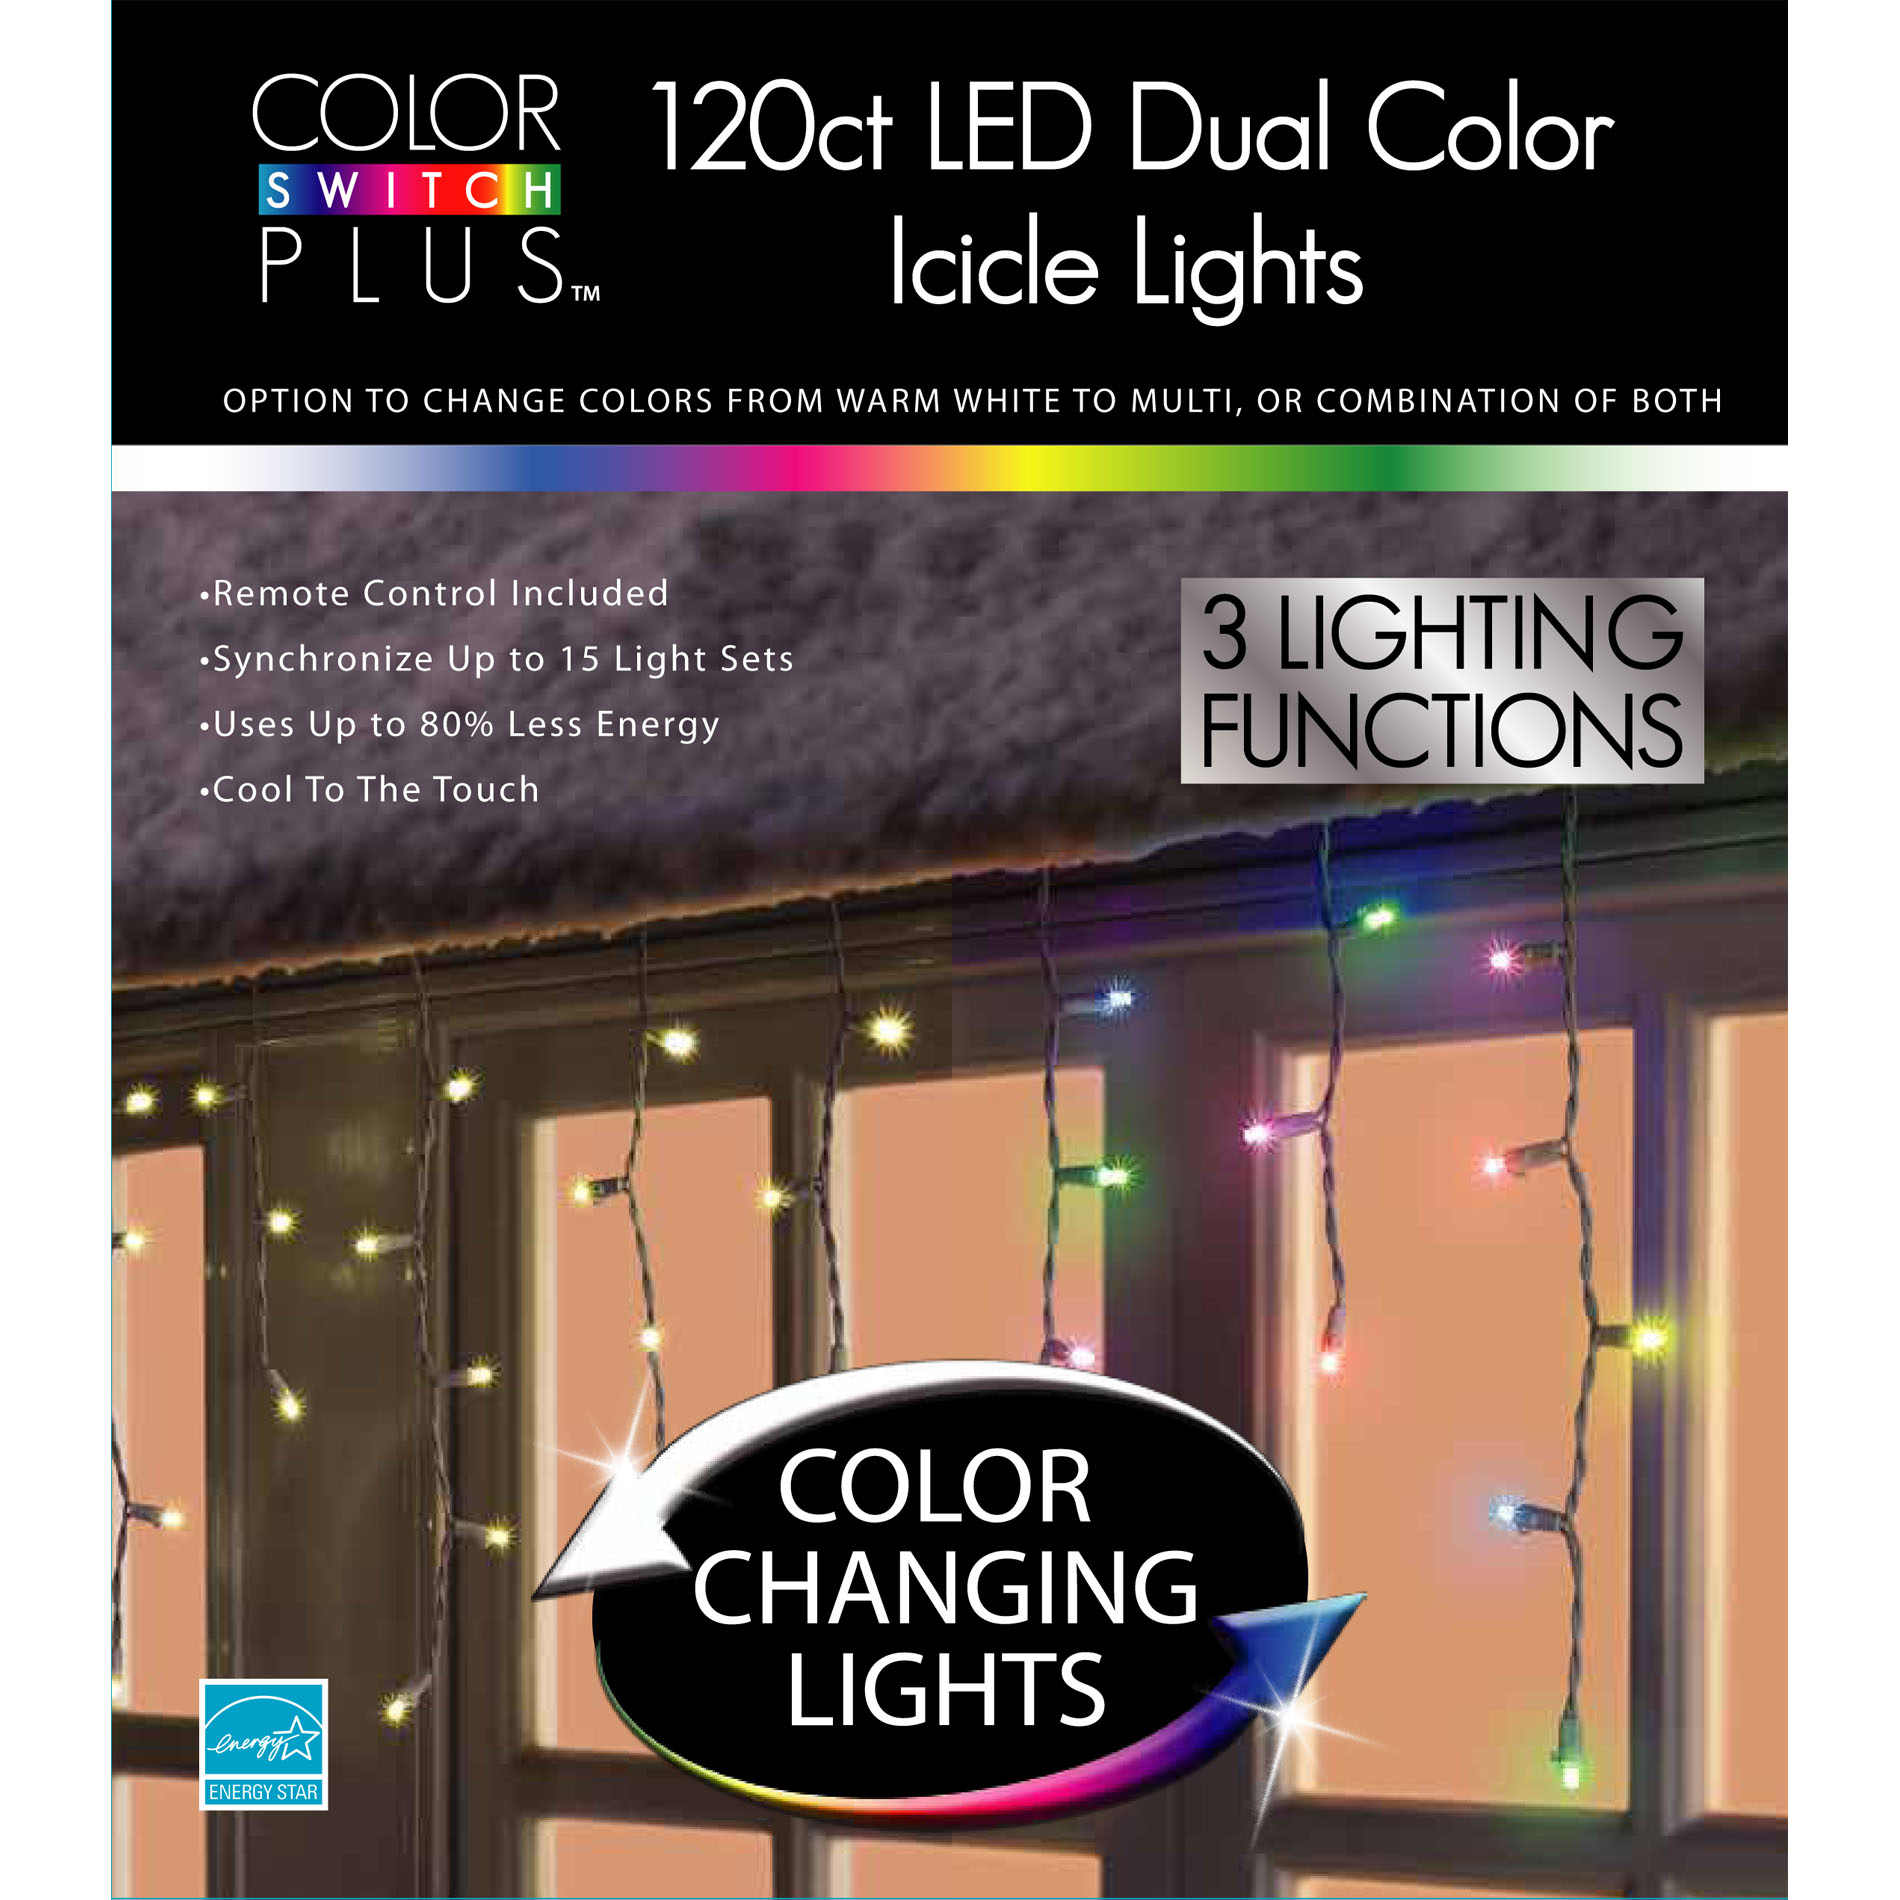 Color Switch Plus Christmas LED Dual Color Changhing with 3 Functions - Icicle Lights, 120 ct